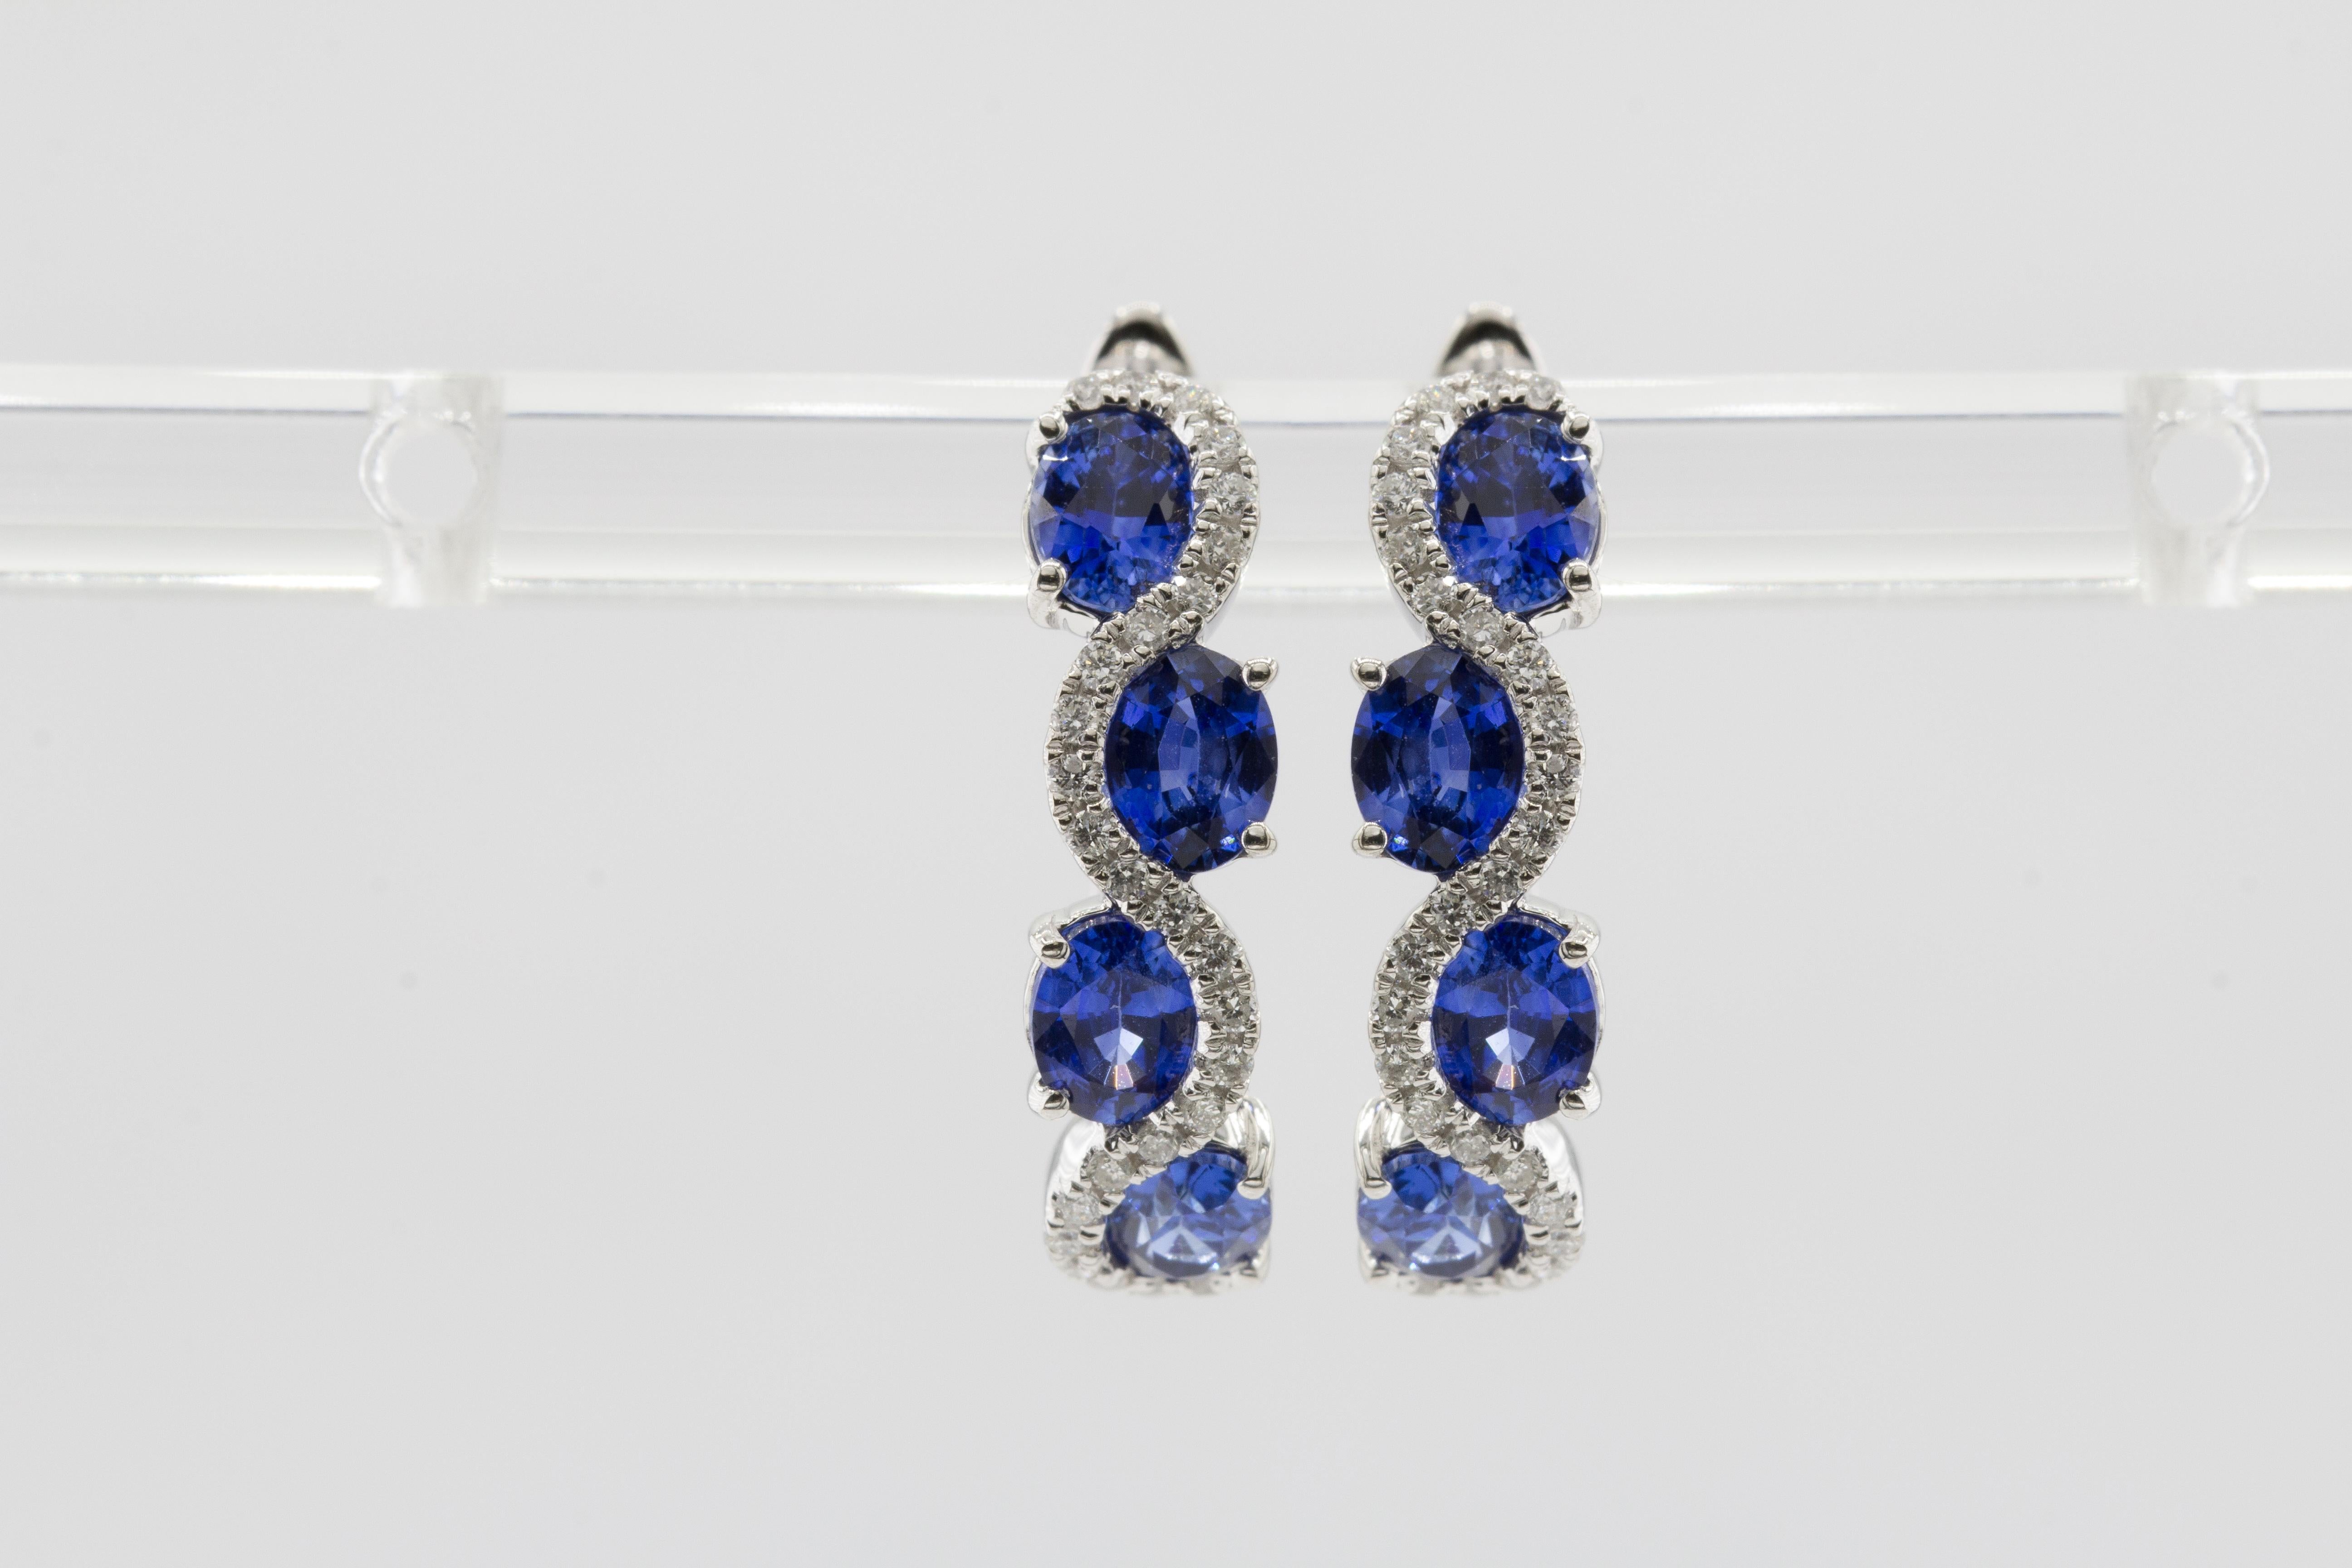 At DiamondTown, we proudly present these exquisite earrings, where each one showcases a harmonious dance of four oval-cut vivid blue sapphires, boasting a combined weight of 2.69 carats. These captivating sapphires are elegantly embraced by a